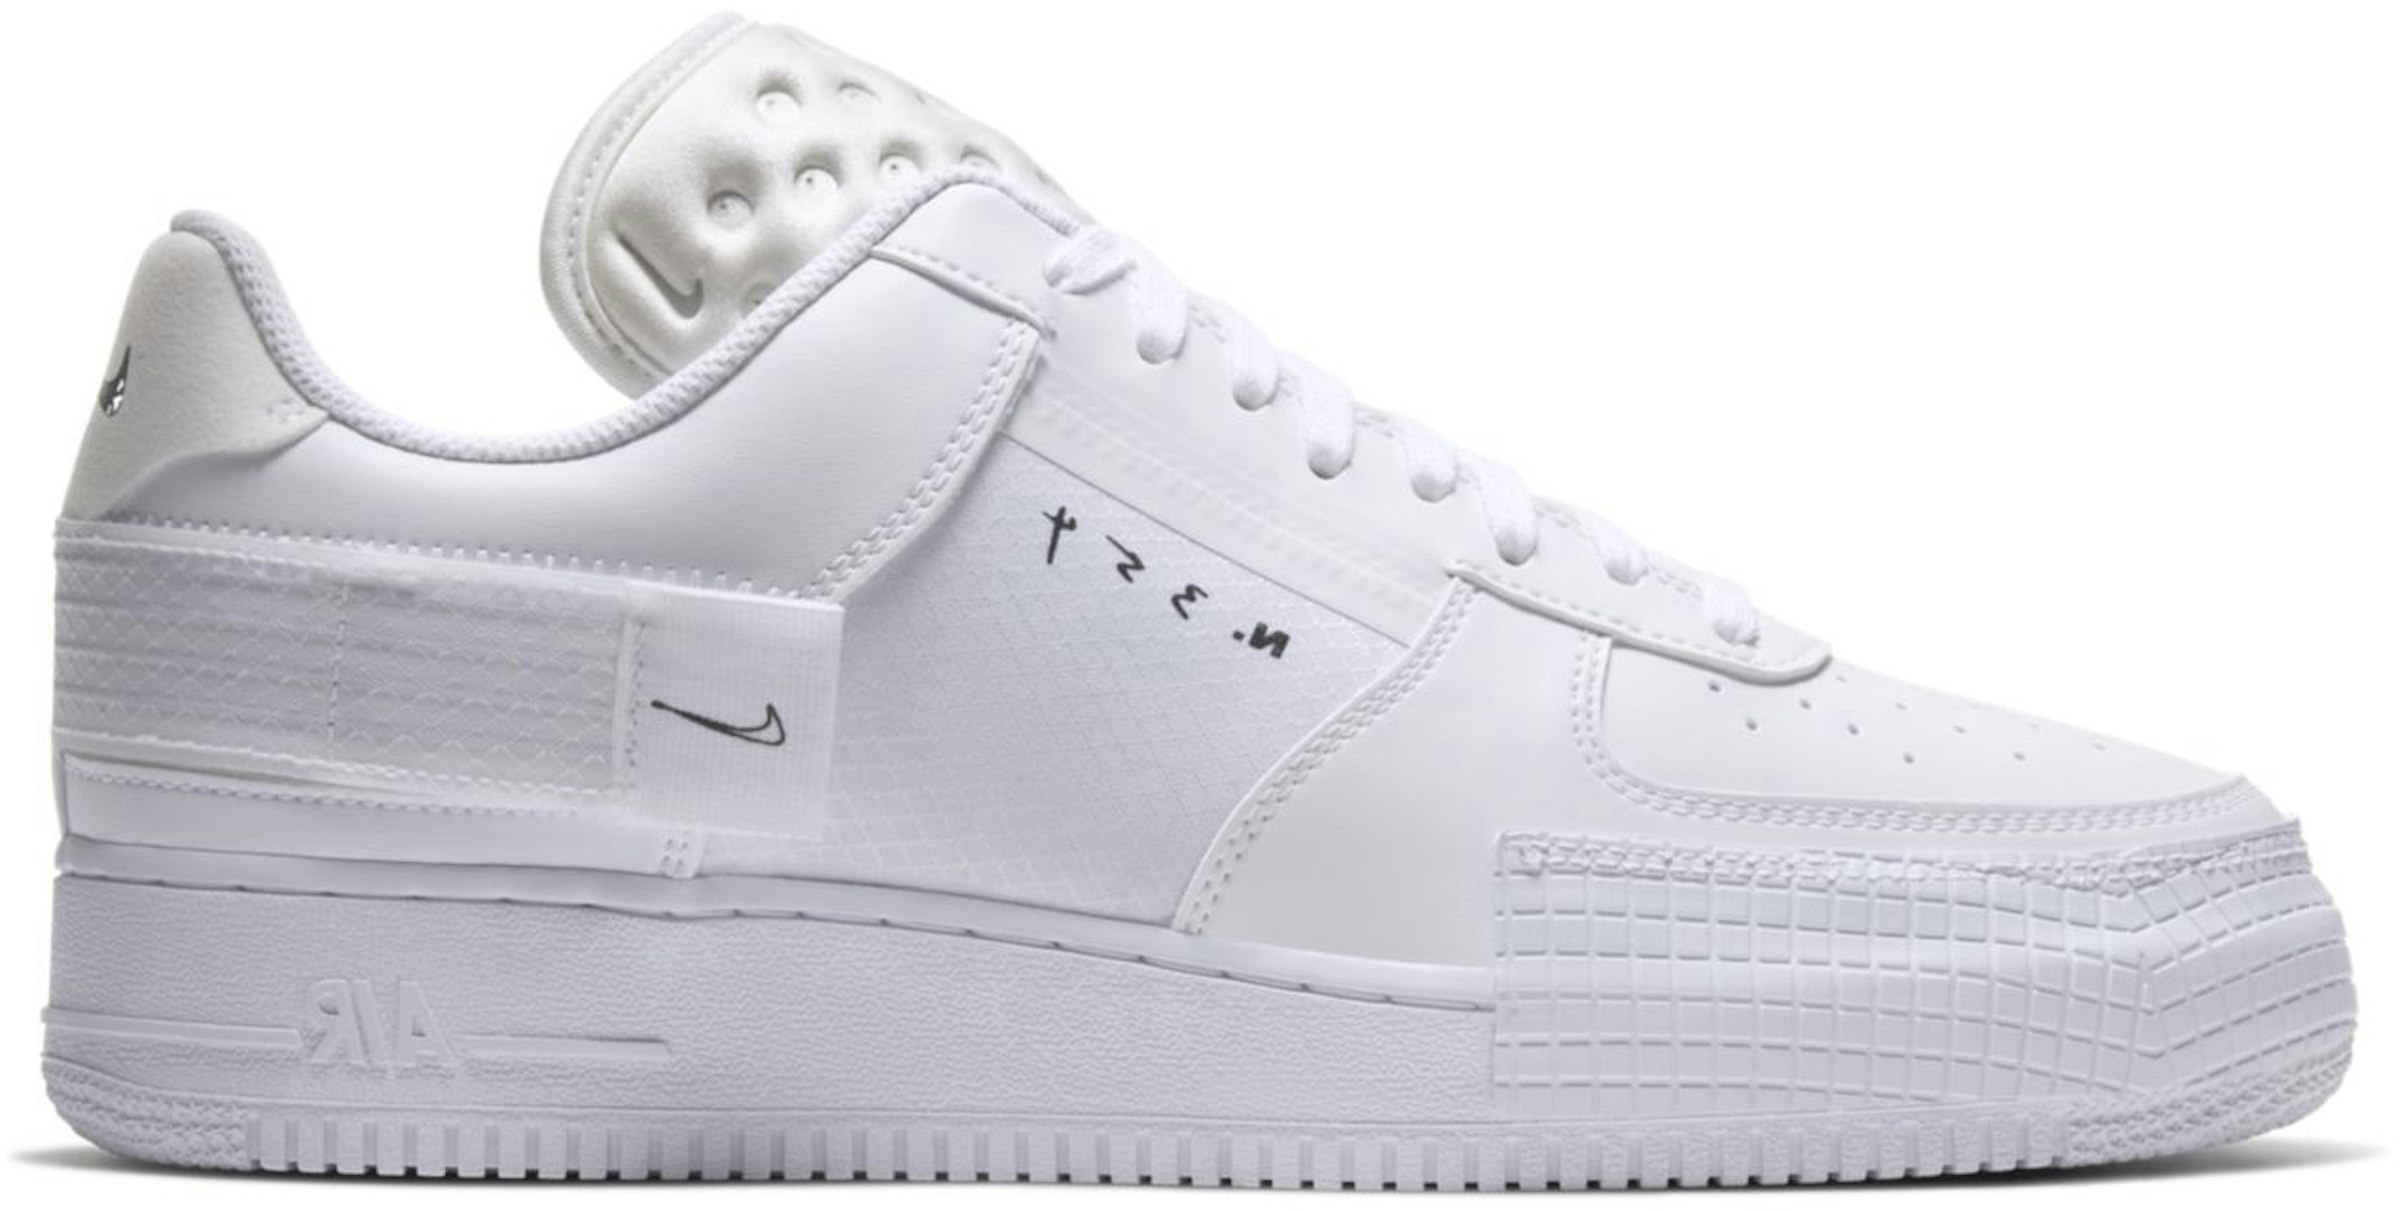 Matemático limpiar Continental Nike Air Force 1 Low Type Triple White Hombre - CQ2344-101 - US